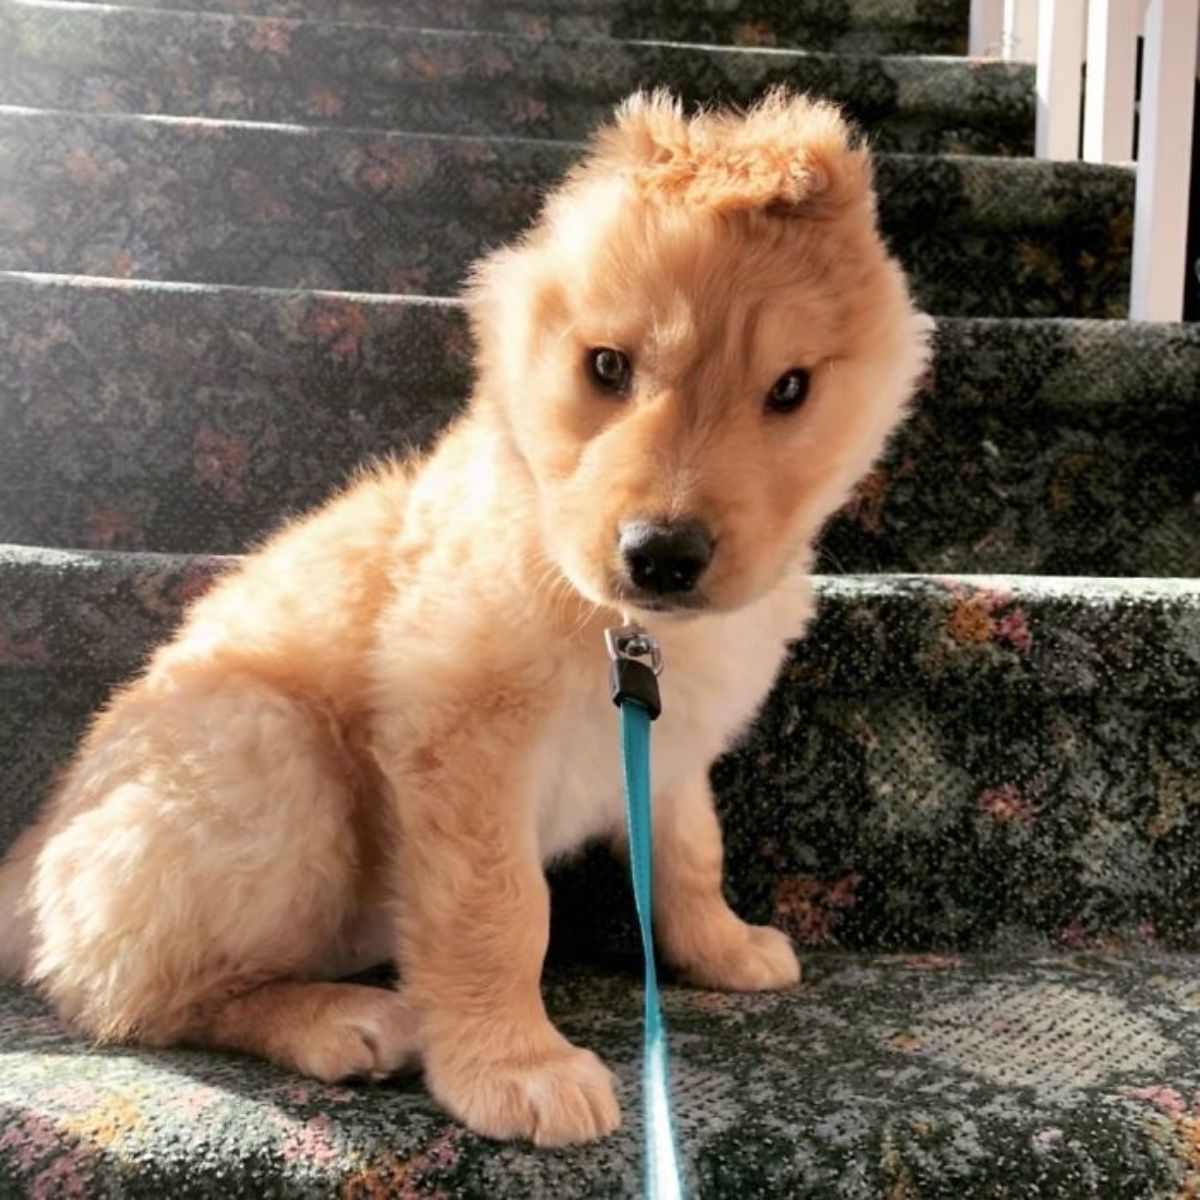 golden retriever puppy with one ear in a blue leash sitting on stairs with dark patterned carpeting